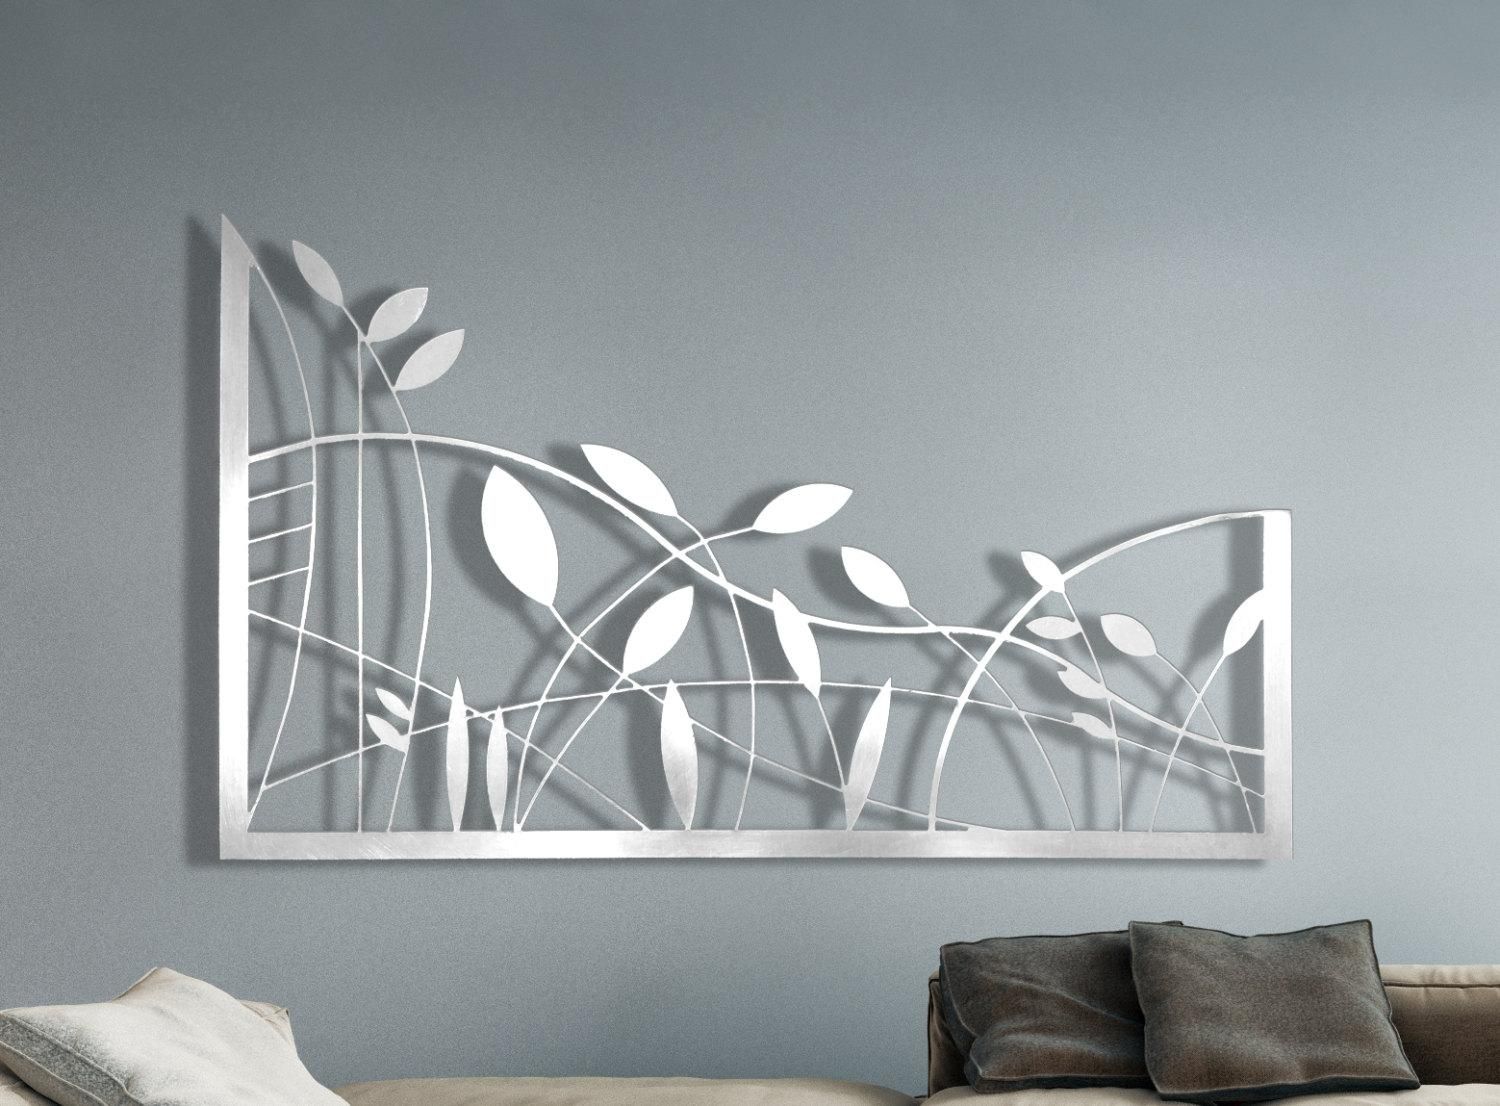 Laser Cut Metal Decorative Wall Art Panel Sculpture For Home With Metal Wall Art Outdoor Use (View 19 of 20)